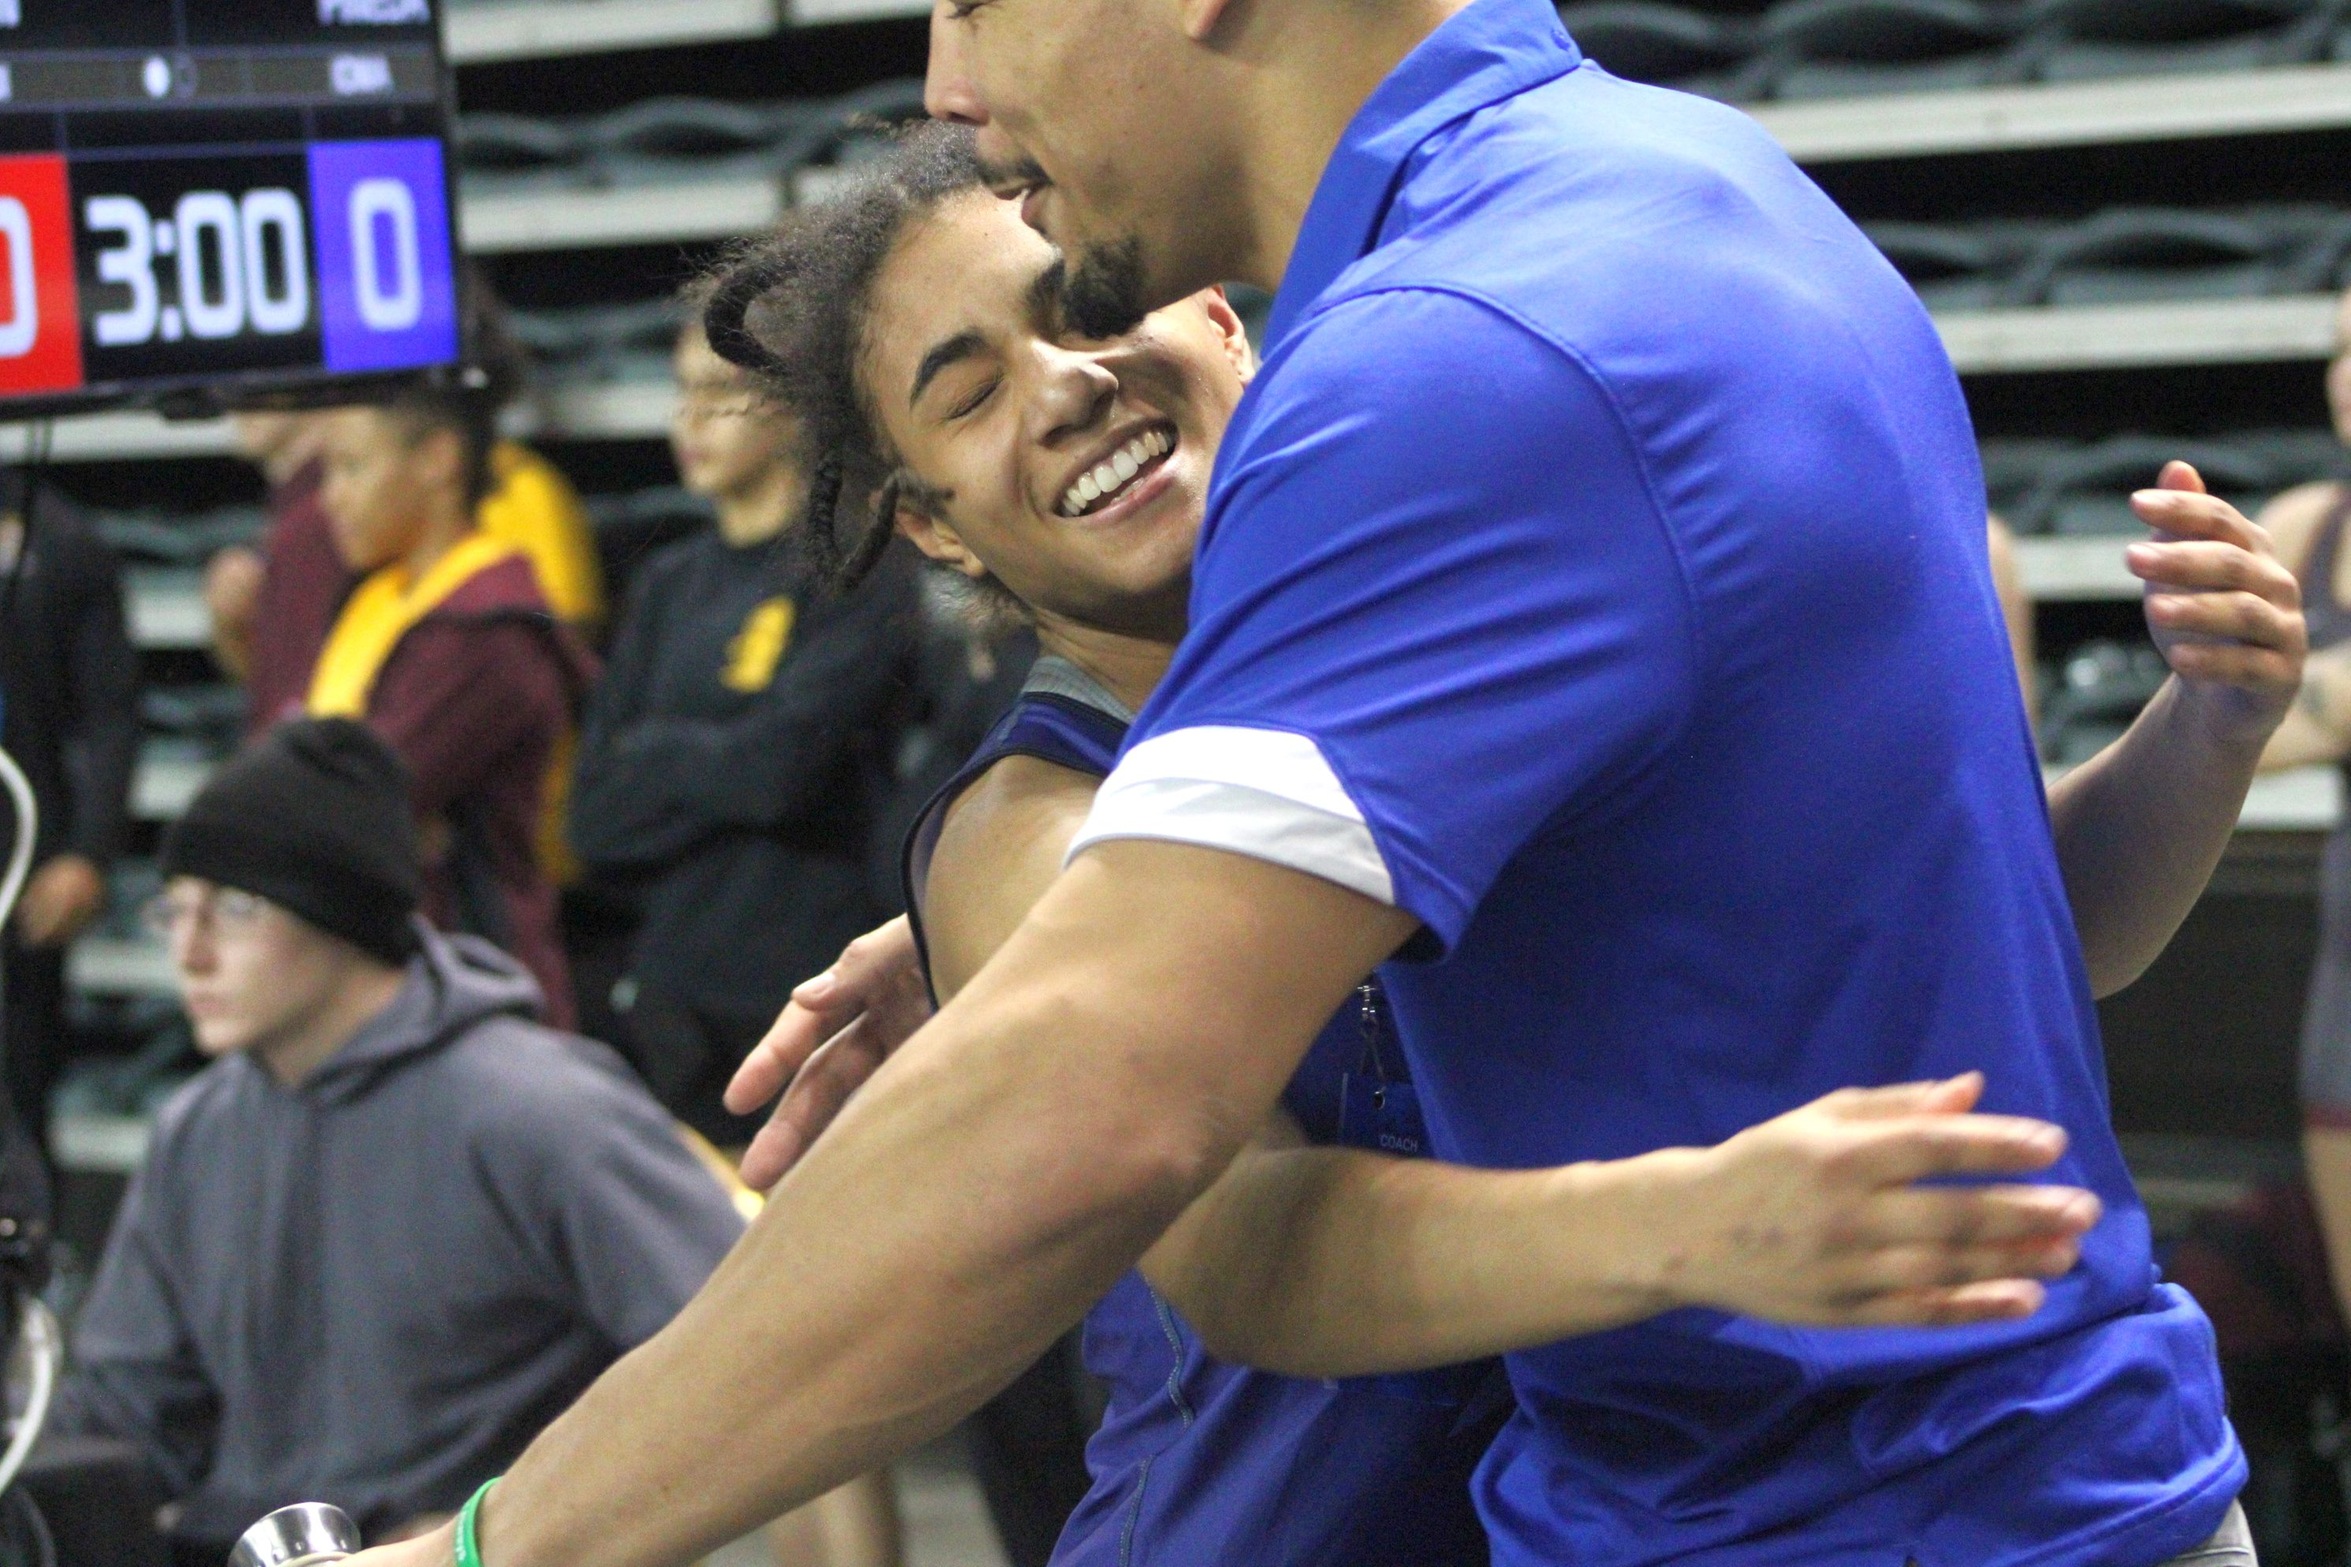 NIACC's Chiara Barbieri hugs her coach Basil Minto after placing third at 101 pounds at the national tournament.